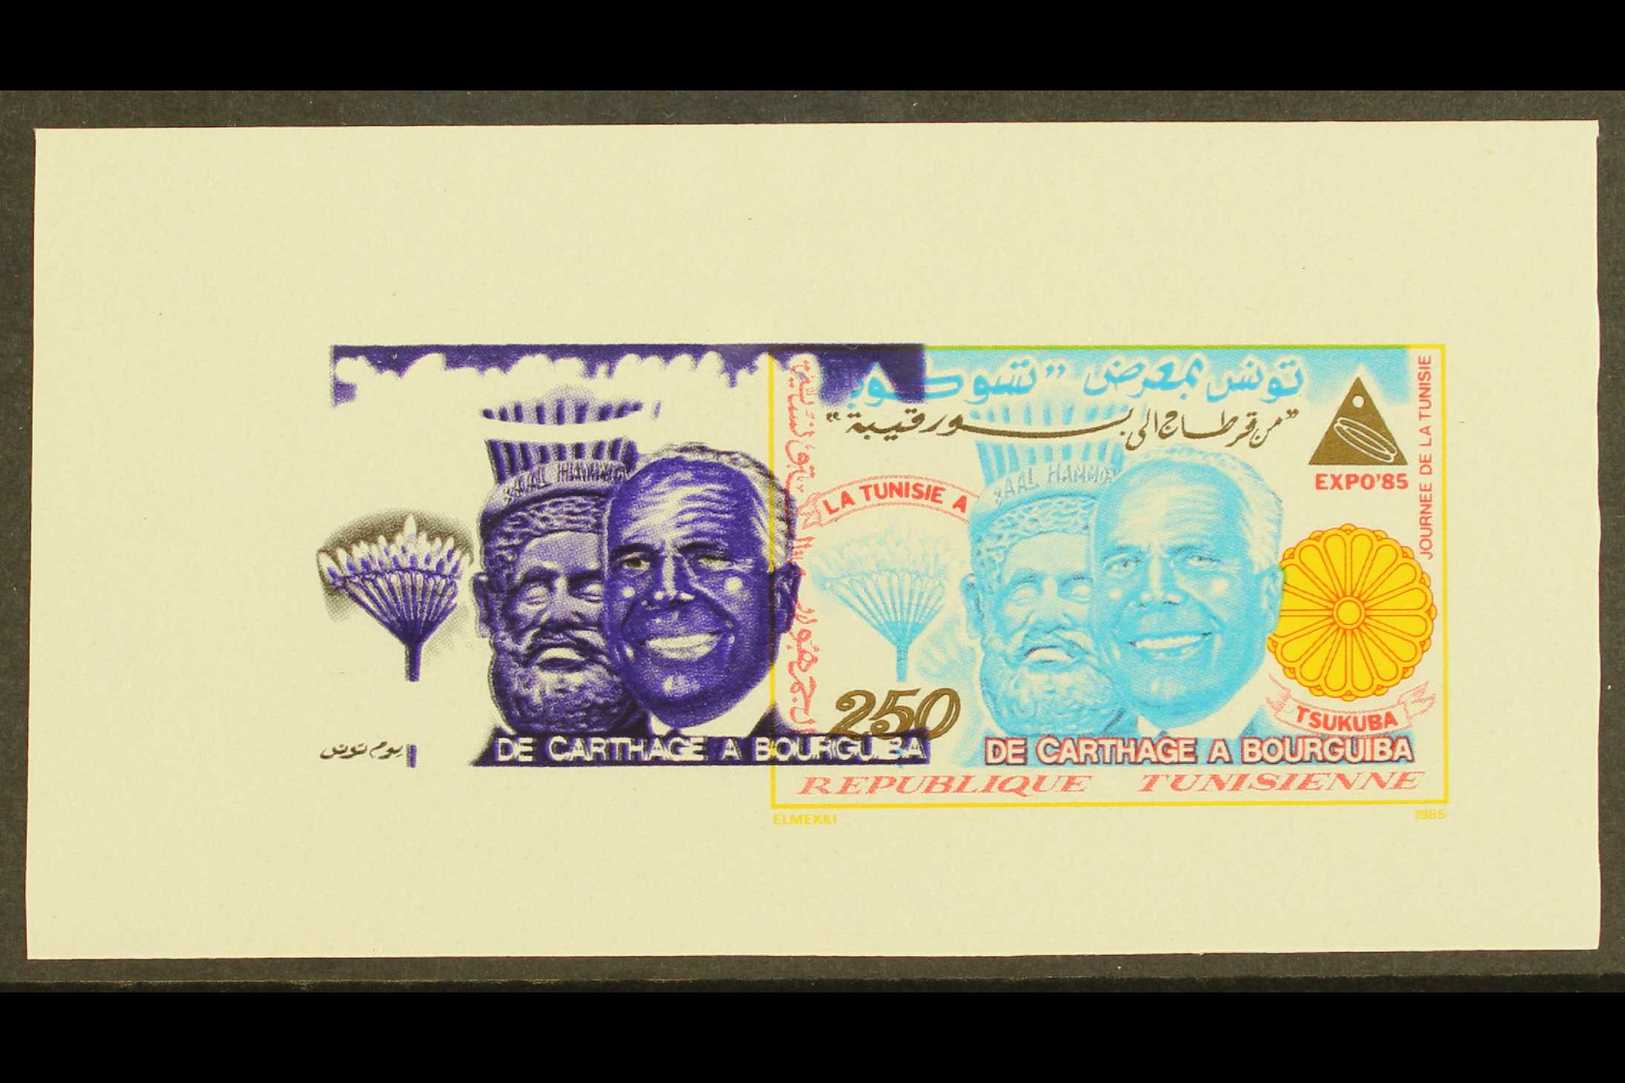 8005 1985 IMPERF PLATE PROOF EXPO 85 Issue, Scott 867, Yv 1033, Single Die Proof With Black & Gold Shifted To The Left, - Tunisia